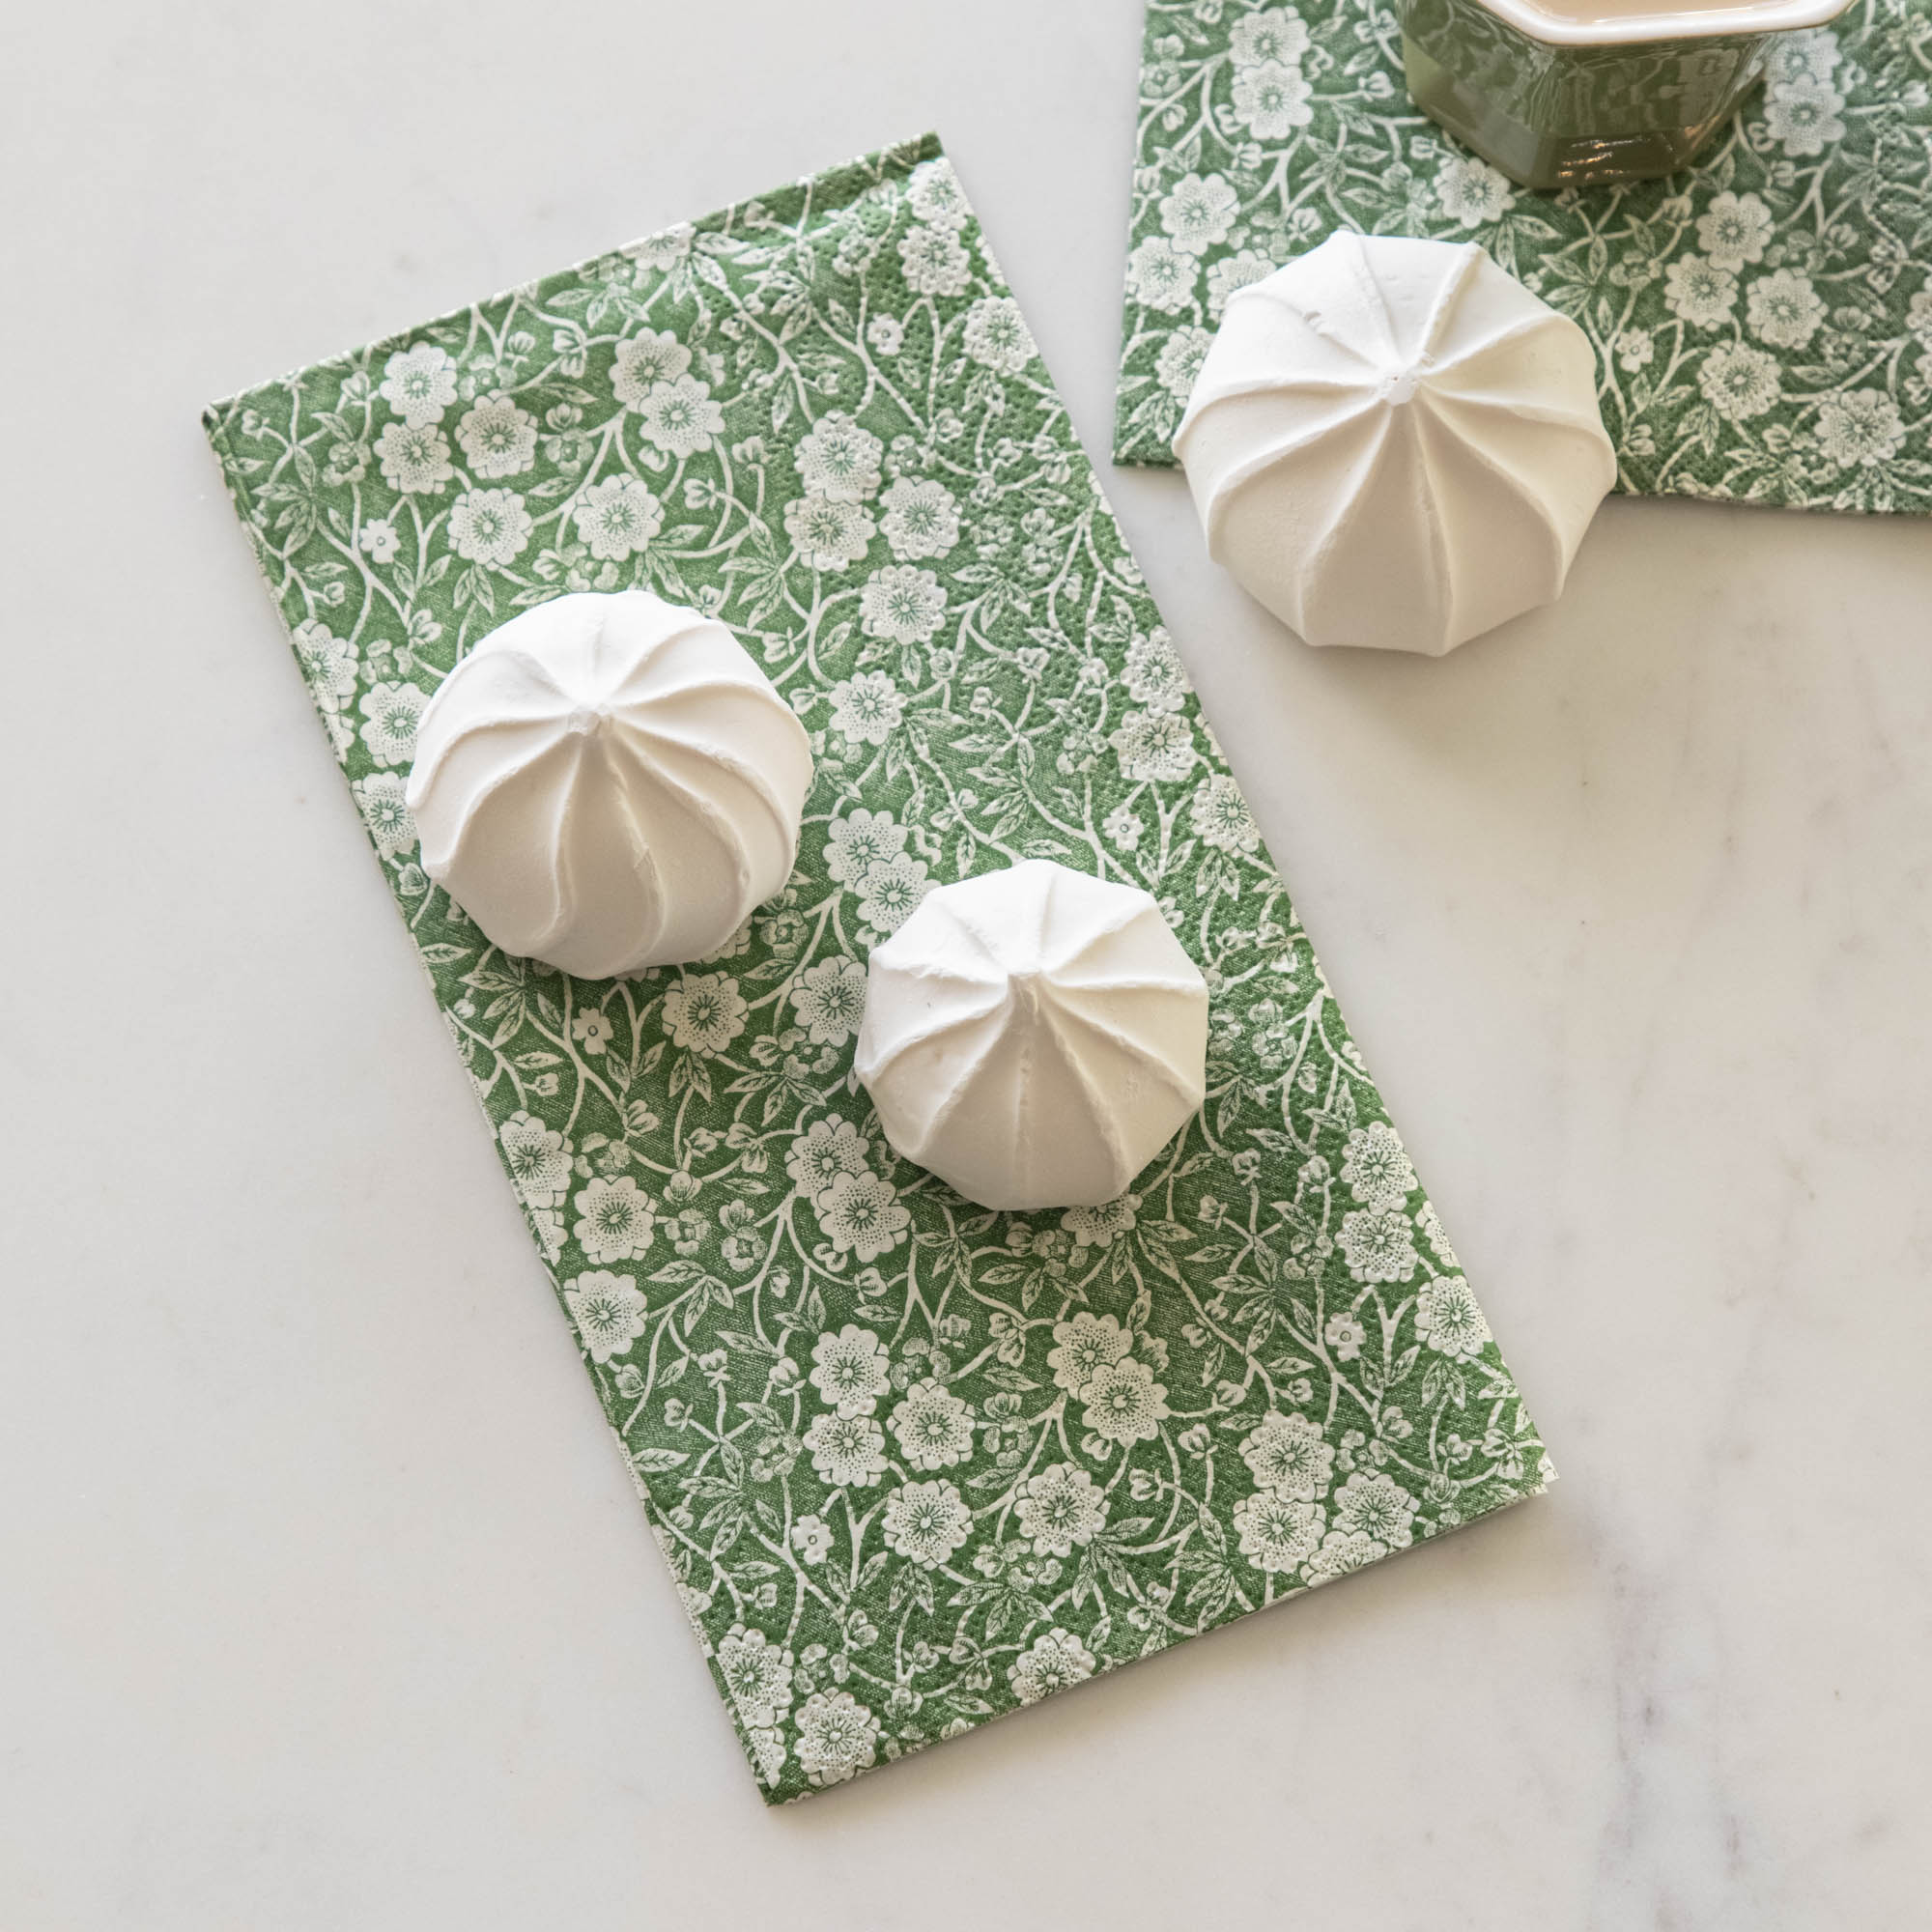 Some marshmallow treats sitting on a Green Calico Guest Napkin, on a white table.